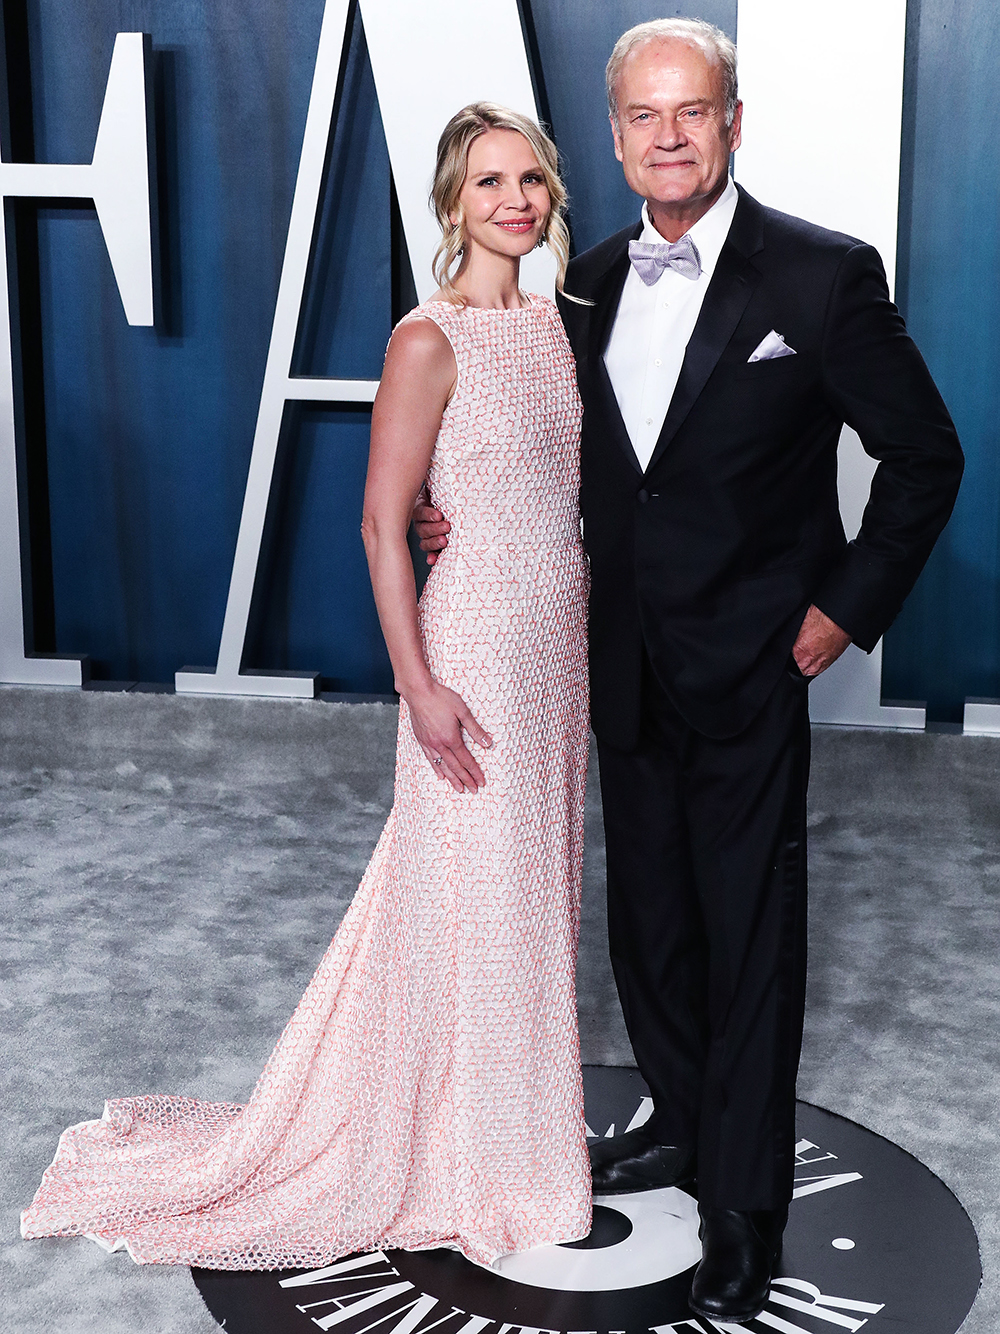 Producer Kayte Walsh and husband/actor Kelsey Grammer arrive at the 2020 Vanity Fair Oscar Party held at the Wallis Annenberg Center for the Performing Arts on September 9 February 2020 in Beverly Hills, Los Angeles, California, USA.2020 Vanity Fair Oscar Party, Beverly Hills, USA - February 10, 2020